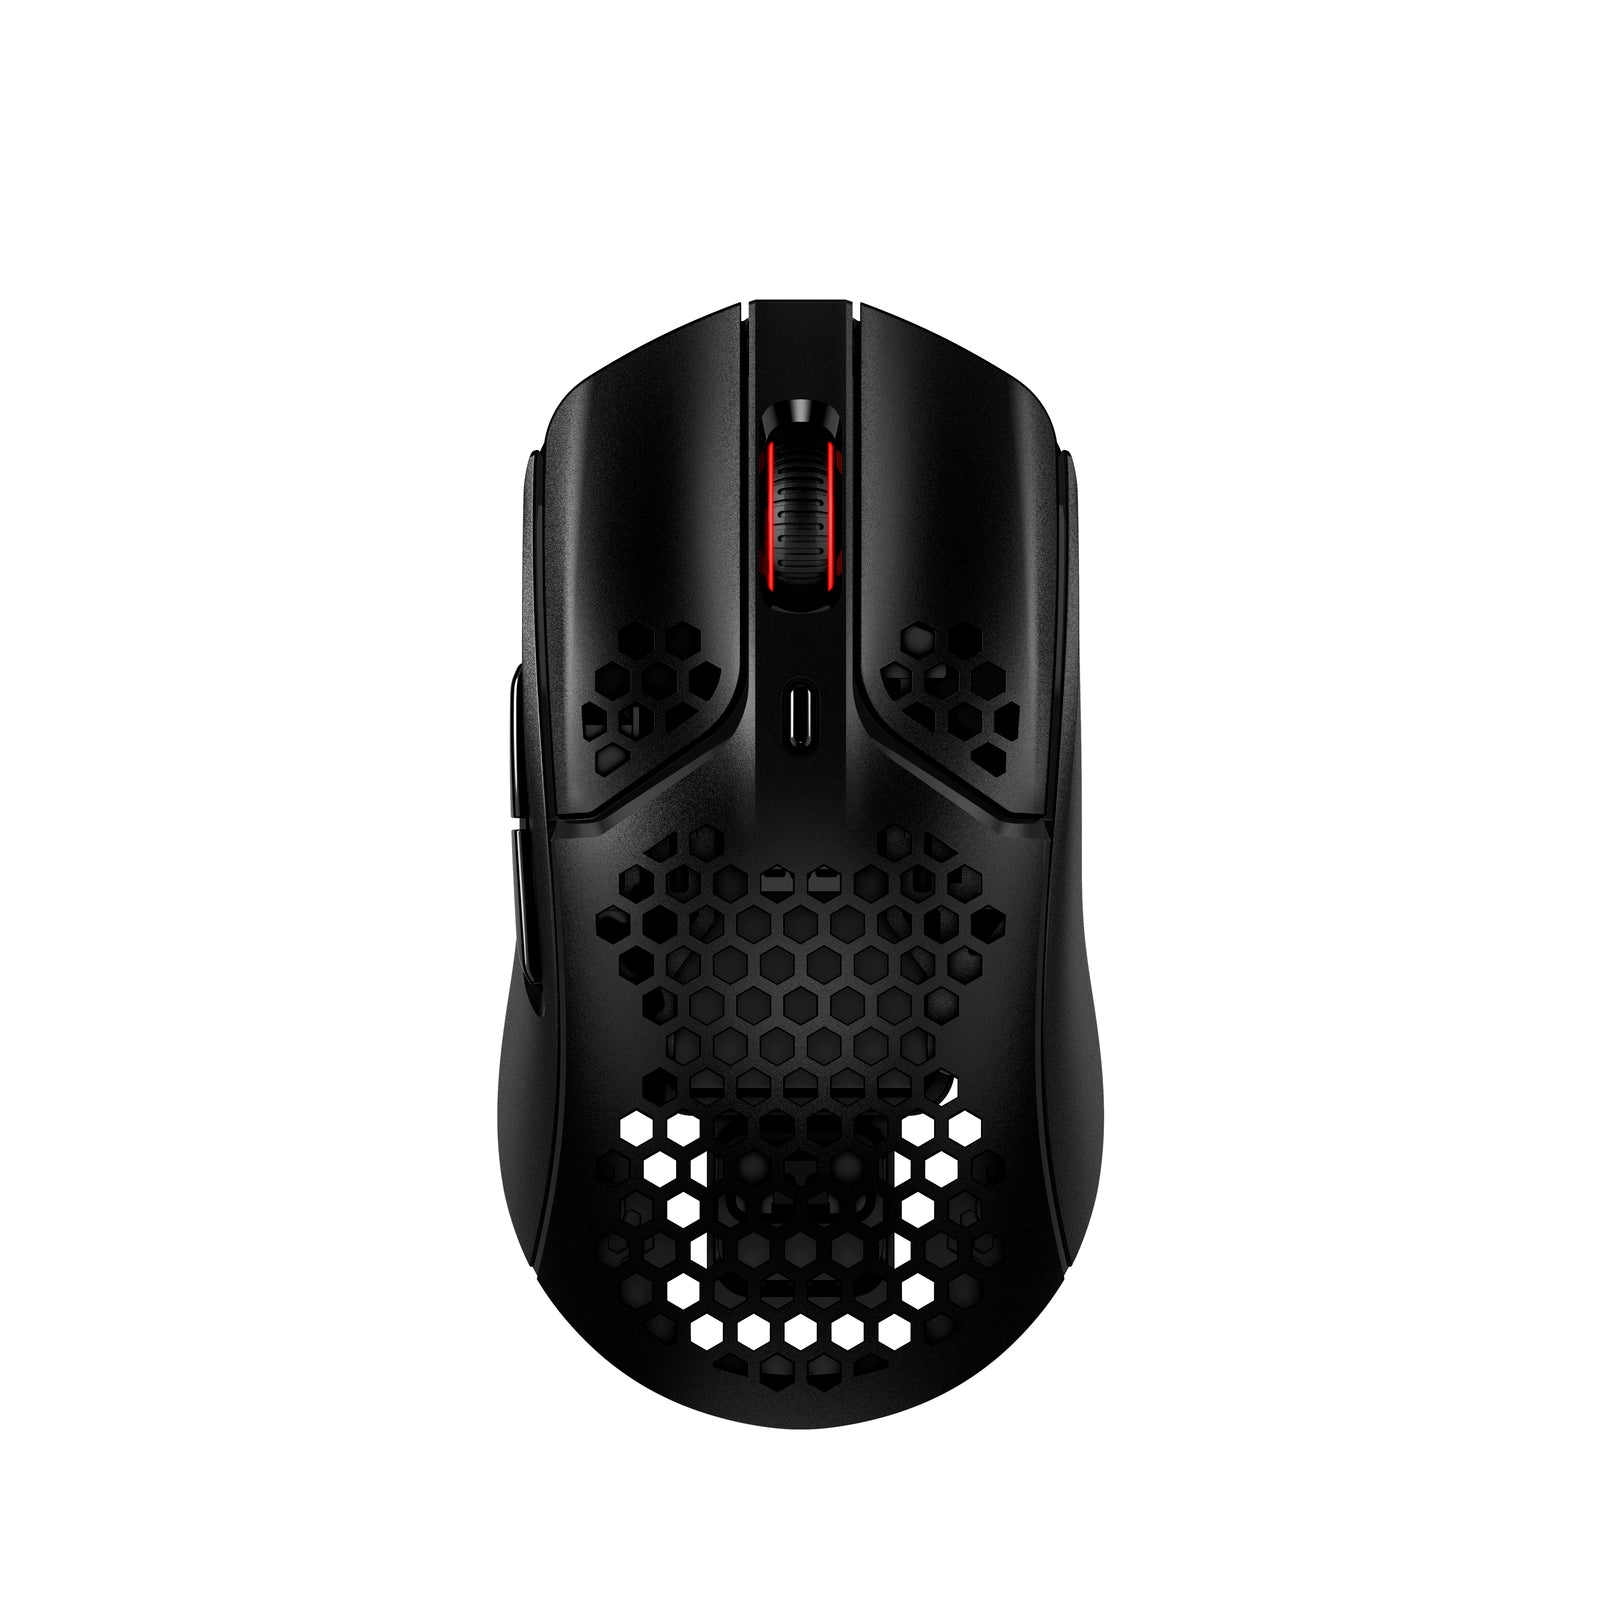 HyperX Pulsefire Haste wireless gaming mouse front facing view displaying hex shell design